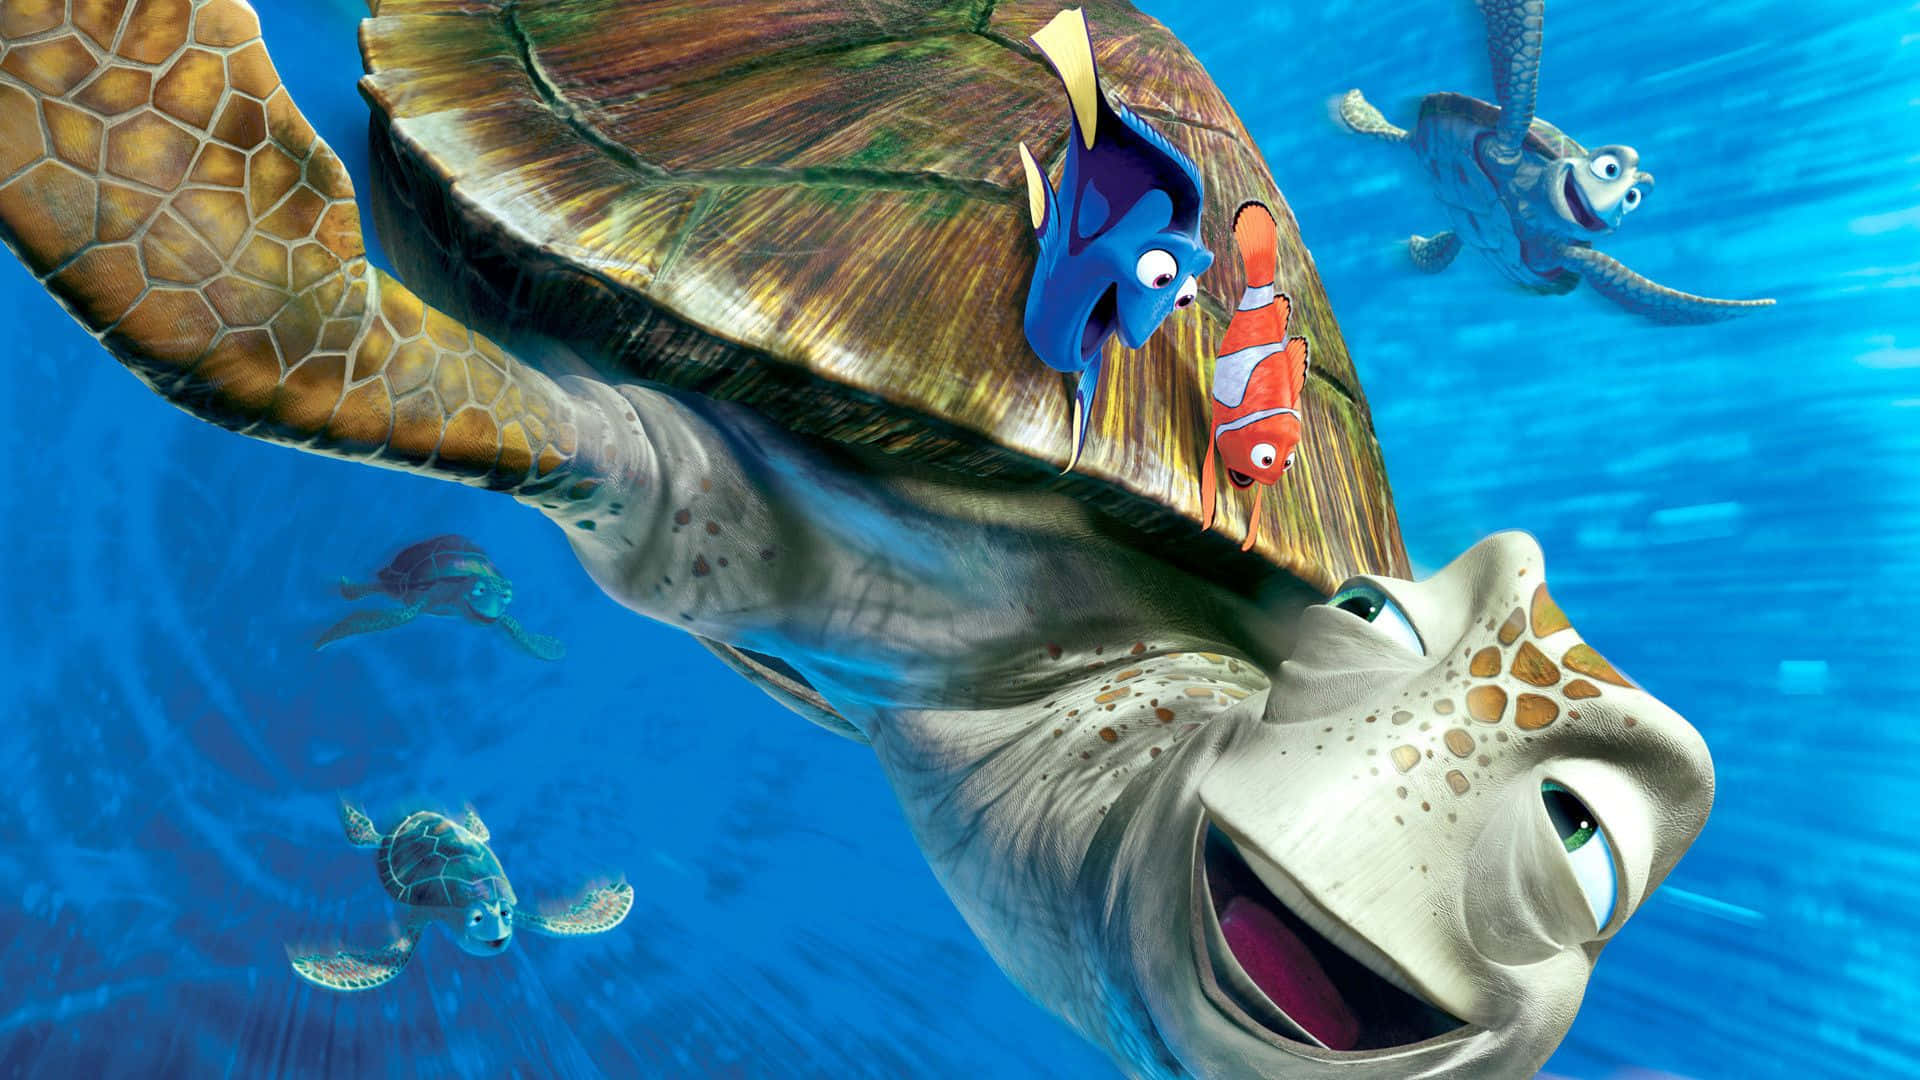 Nemo, Marlin, and Dory on an underwater adventure